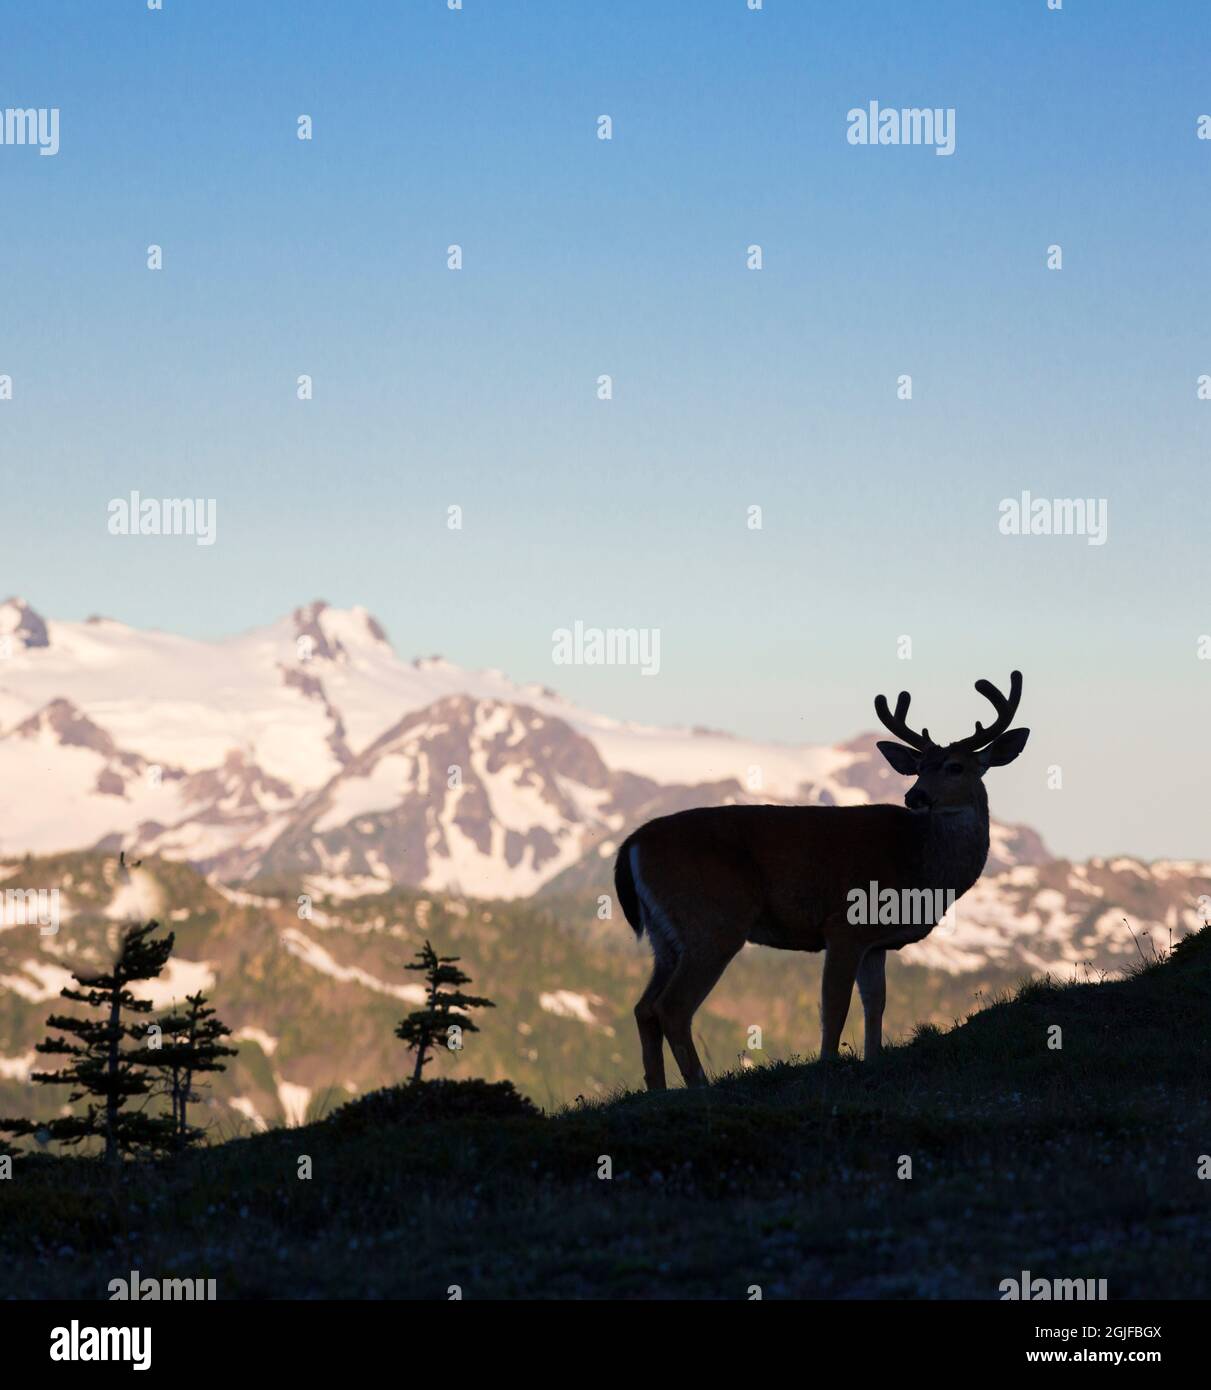 USA, Washington State. Olympic National Park. Silhouetted Black-tailed buck in velvet with Mt. Olympus in background. Stock Photo